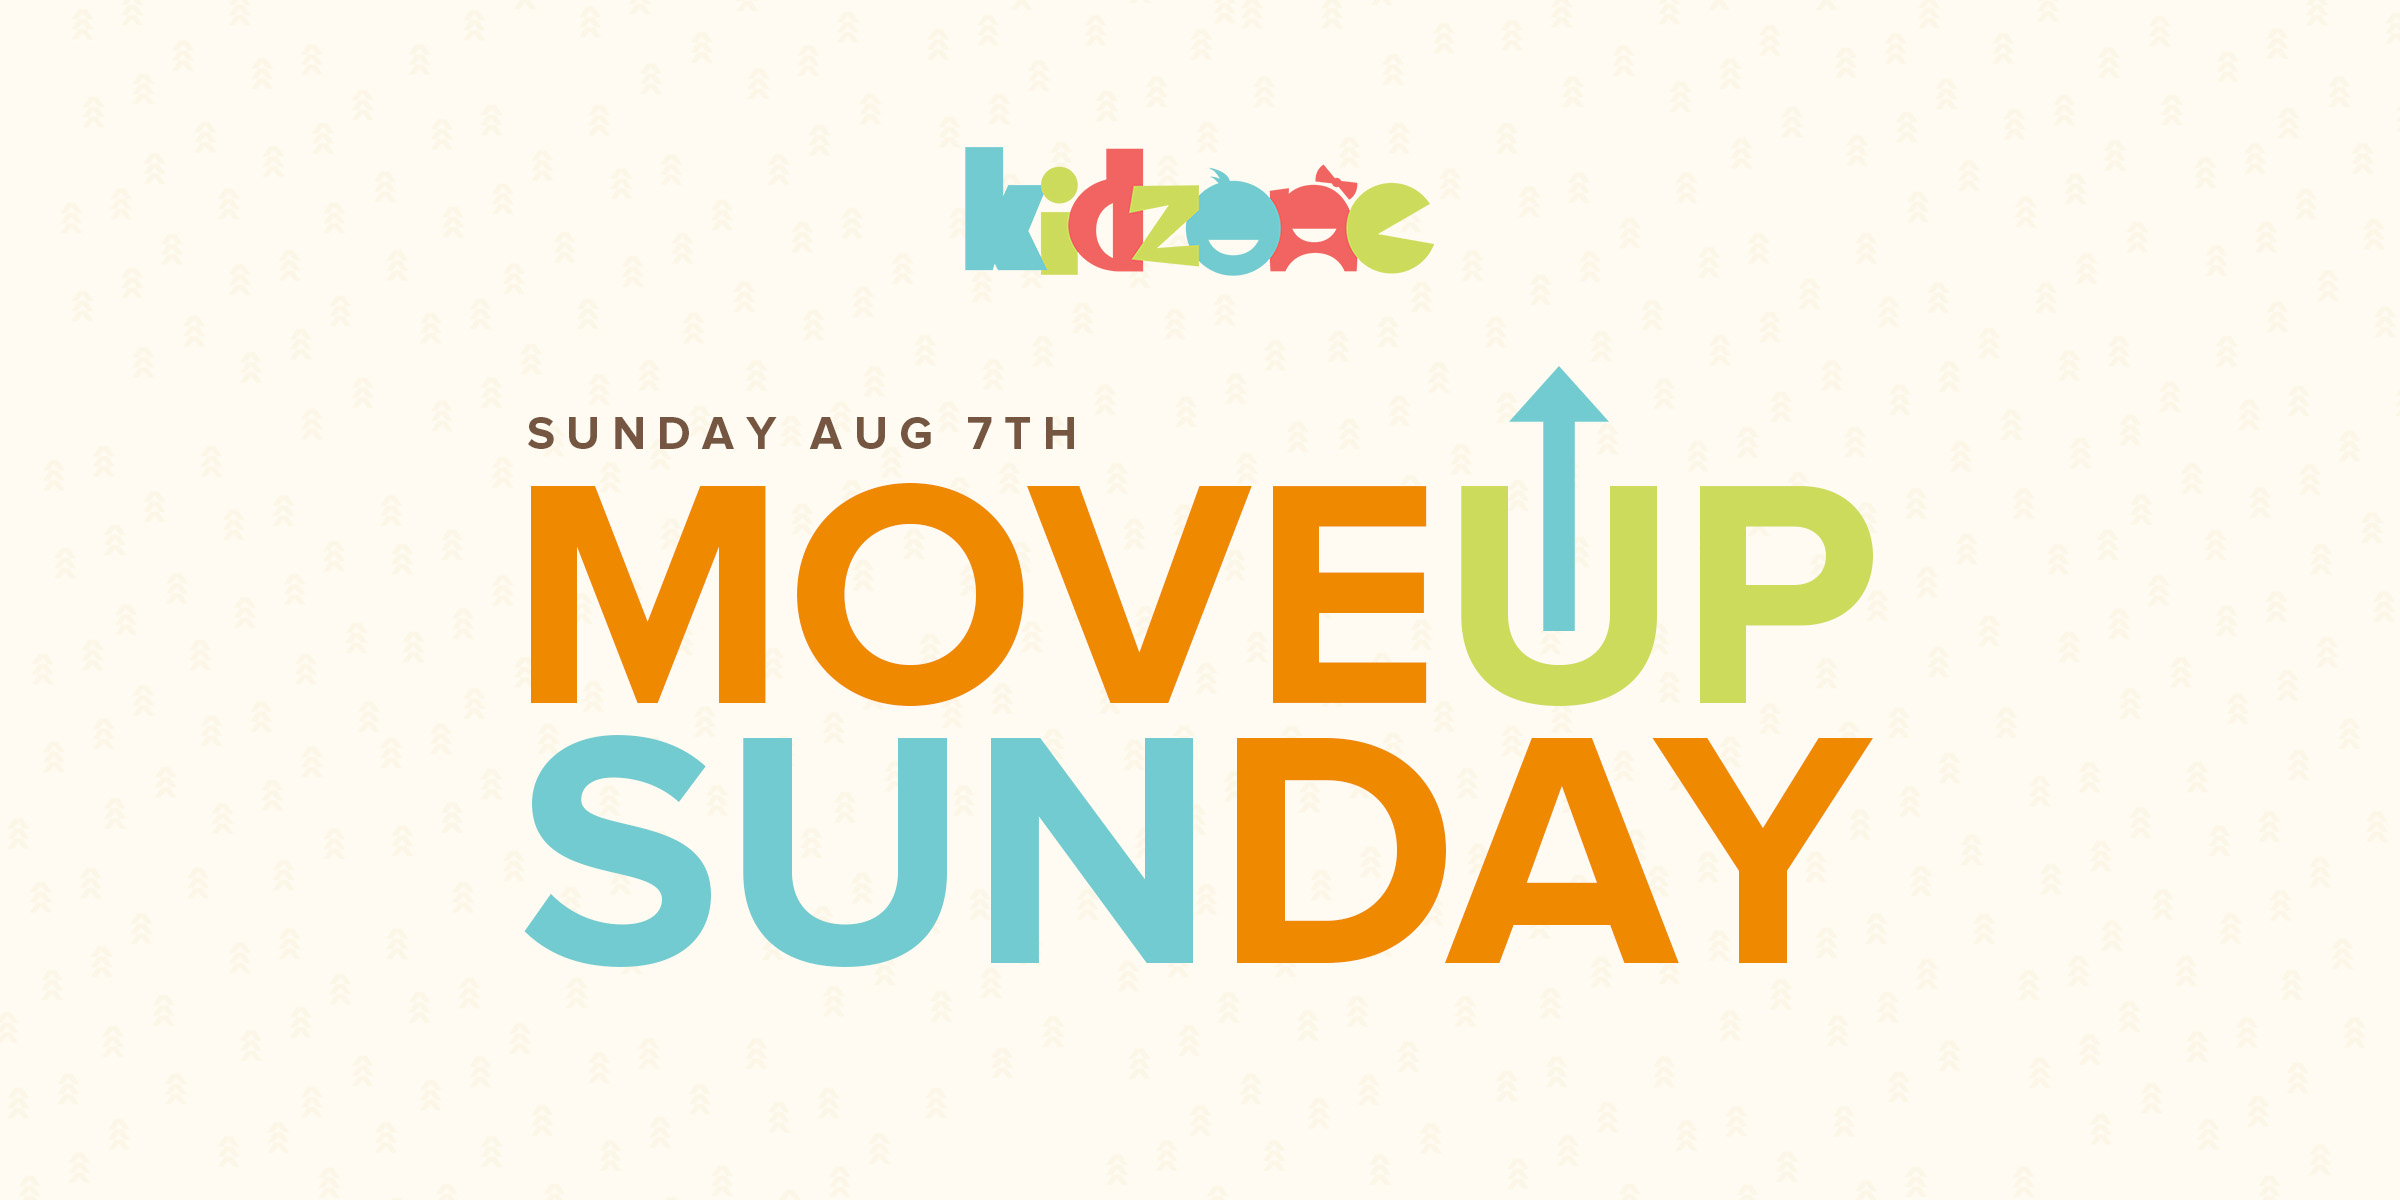 KidZone Move Up Sunday is August 7th